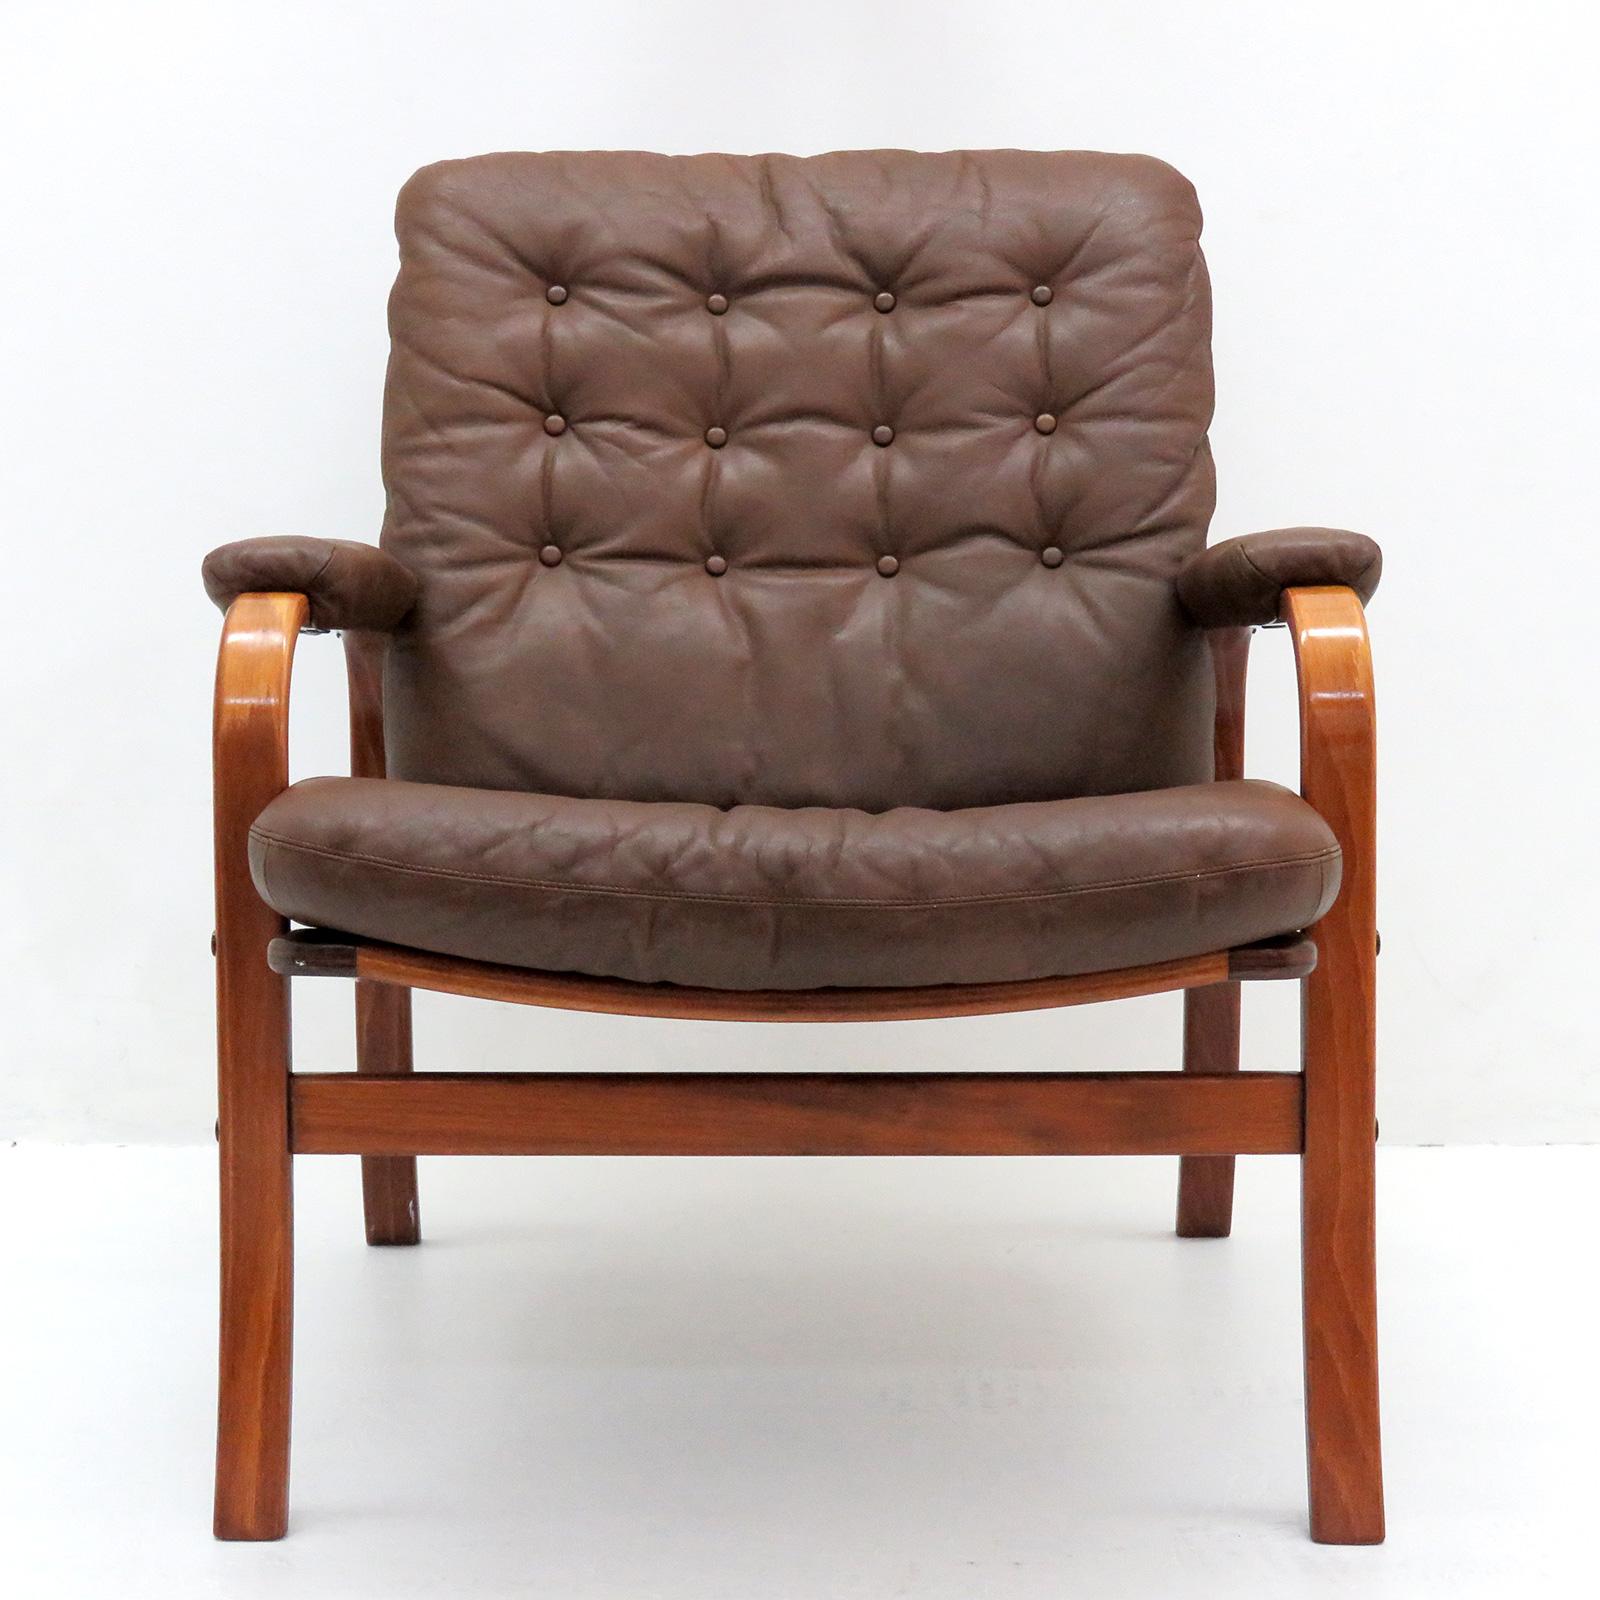 Striking 1950s Swedish bentwood chairs by Göte Möbler Nässjö, with brown tufted leather cushions, great patina, marked.